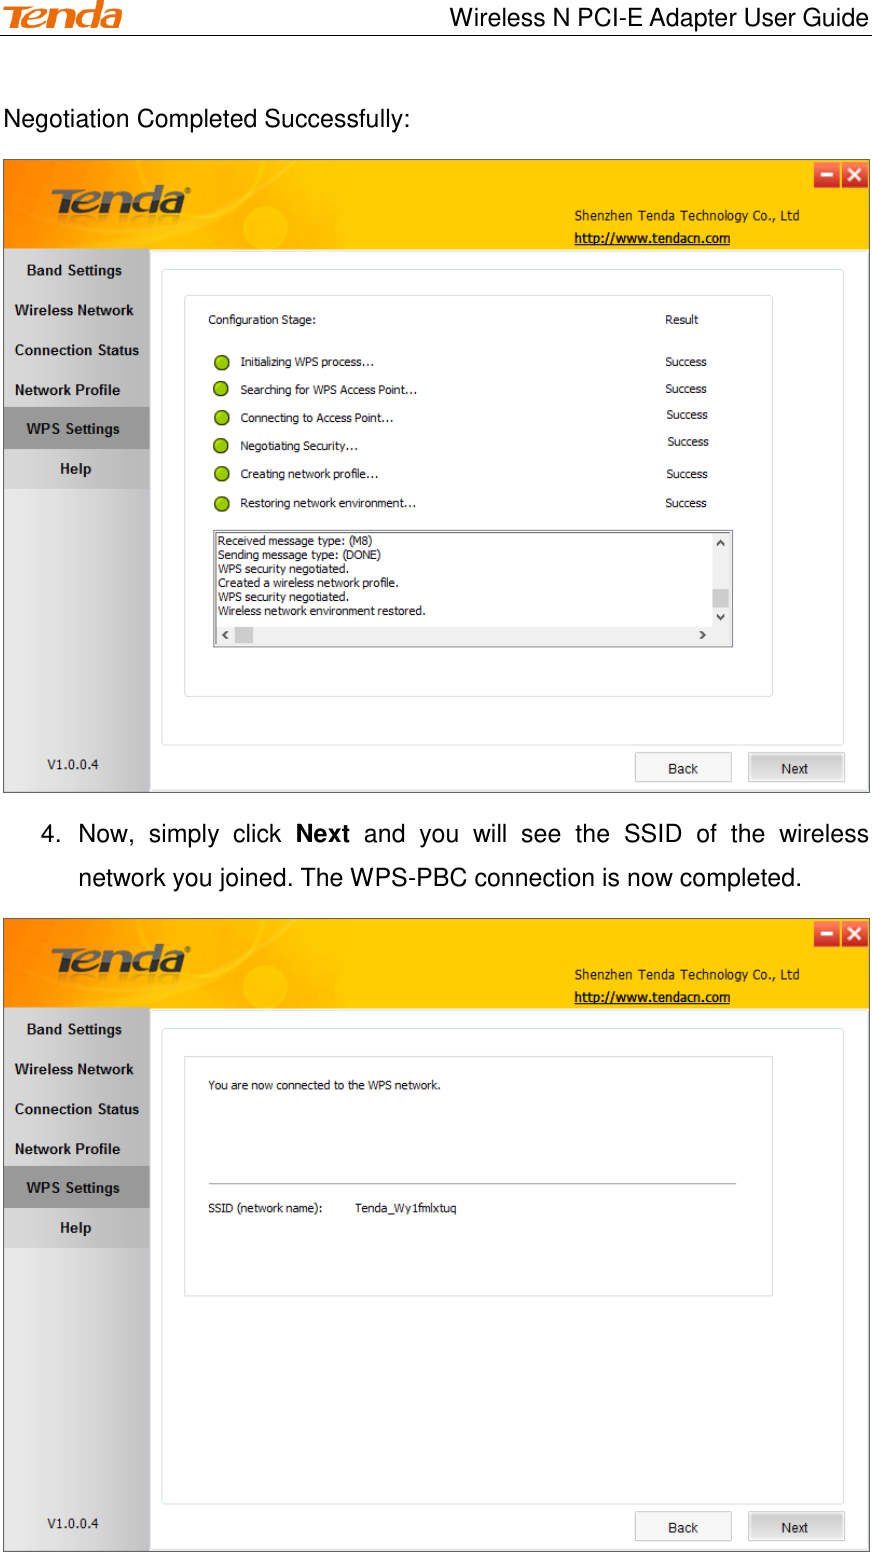                                    Wireless N PCI-E Adapter User Guide Negotiation Completed Successfully:  4.  Now,  simply  click  Next  and  you  will  see  the  SSID  of  the  wireless network you joined. The WPS-PBC connection is now completed.  